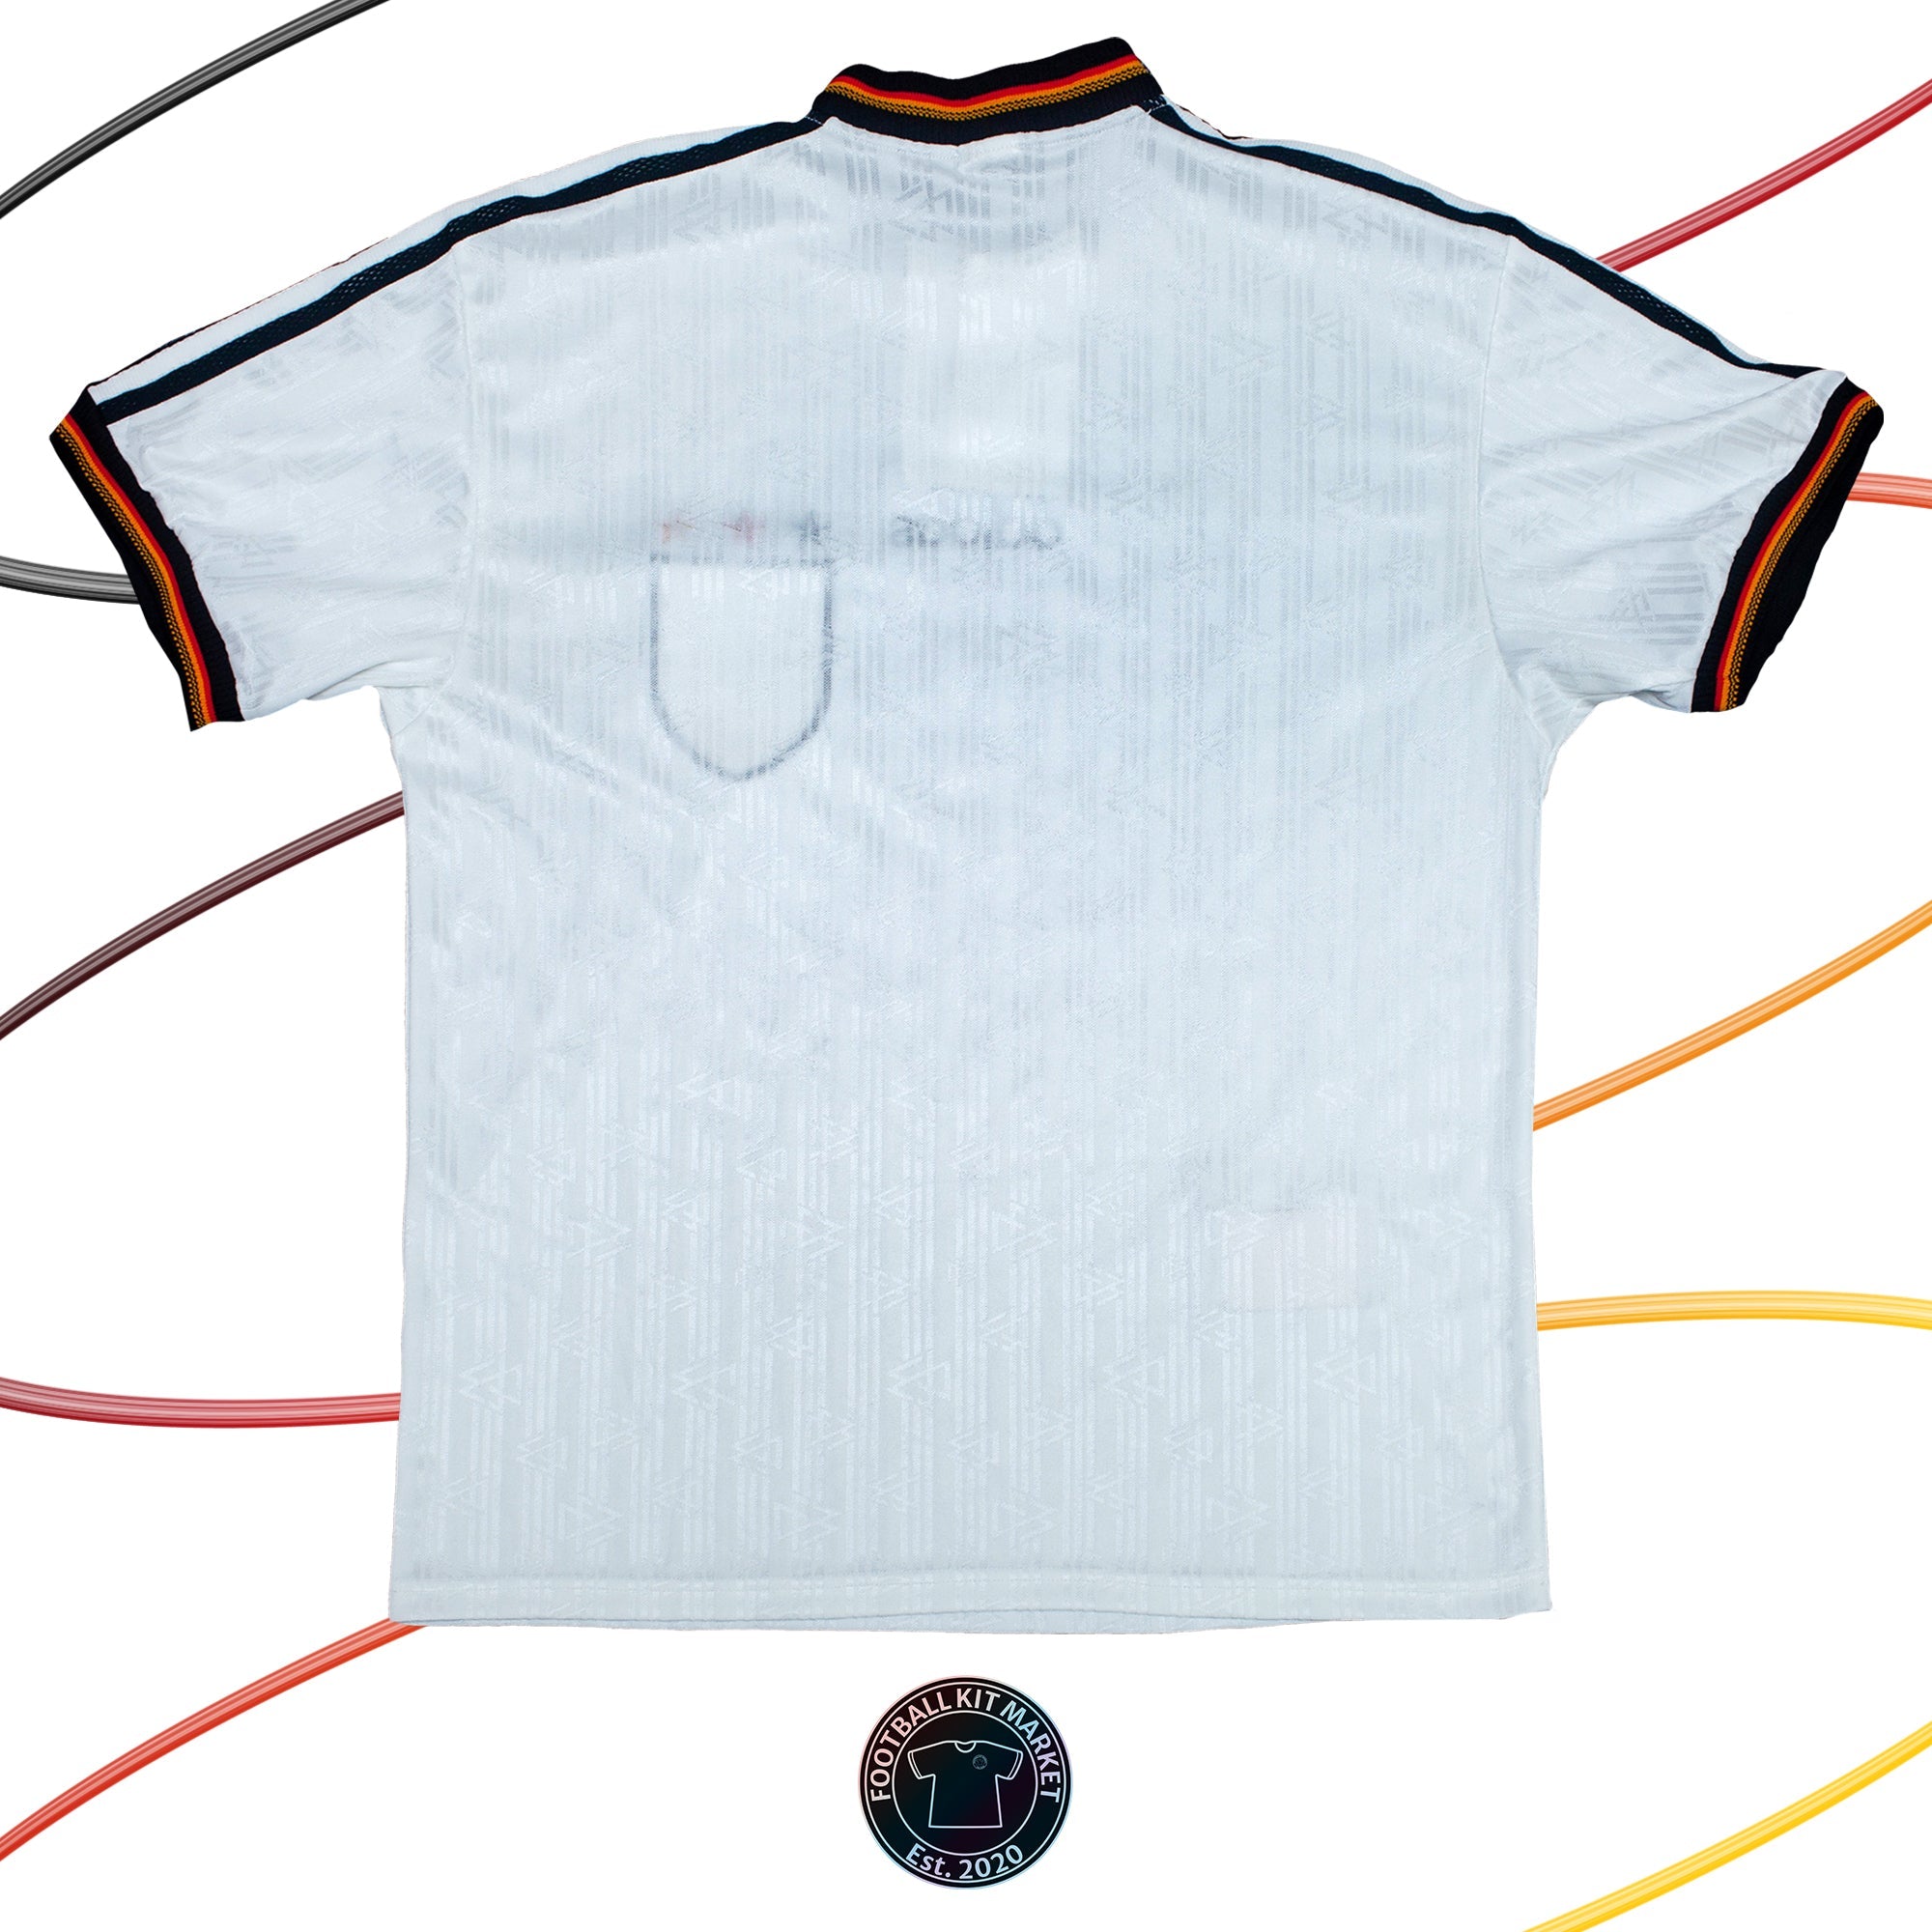 Genuine GERMANY Home Shirt (1996-1998) - ADIDAS (L) - Product Image from Football Kit Market